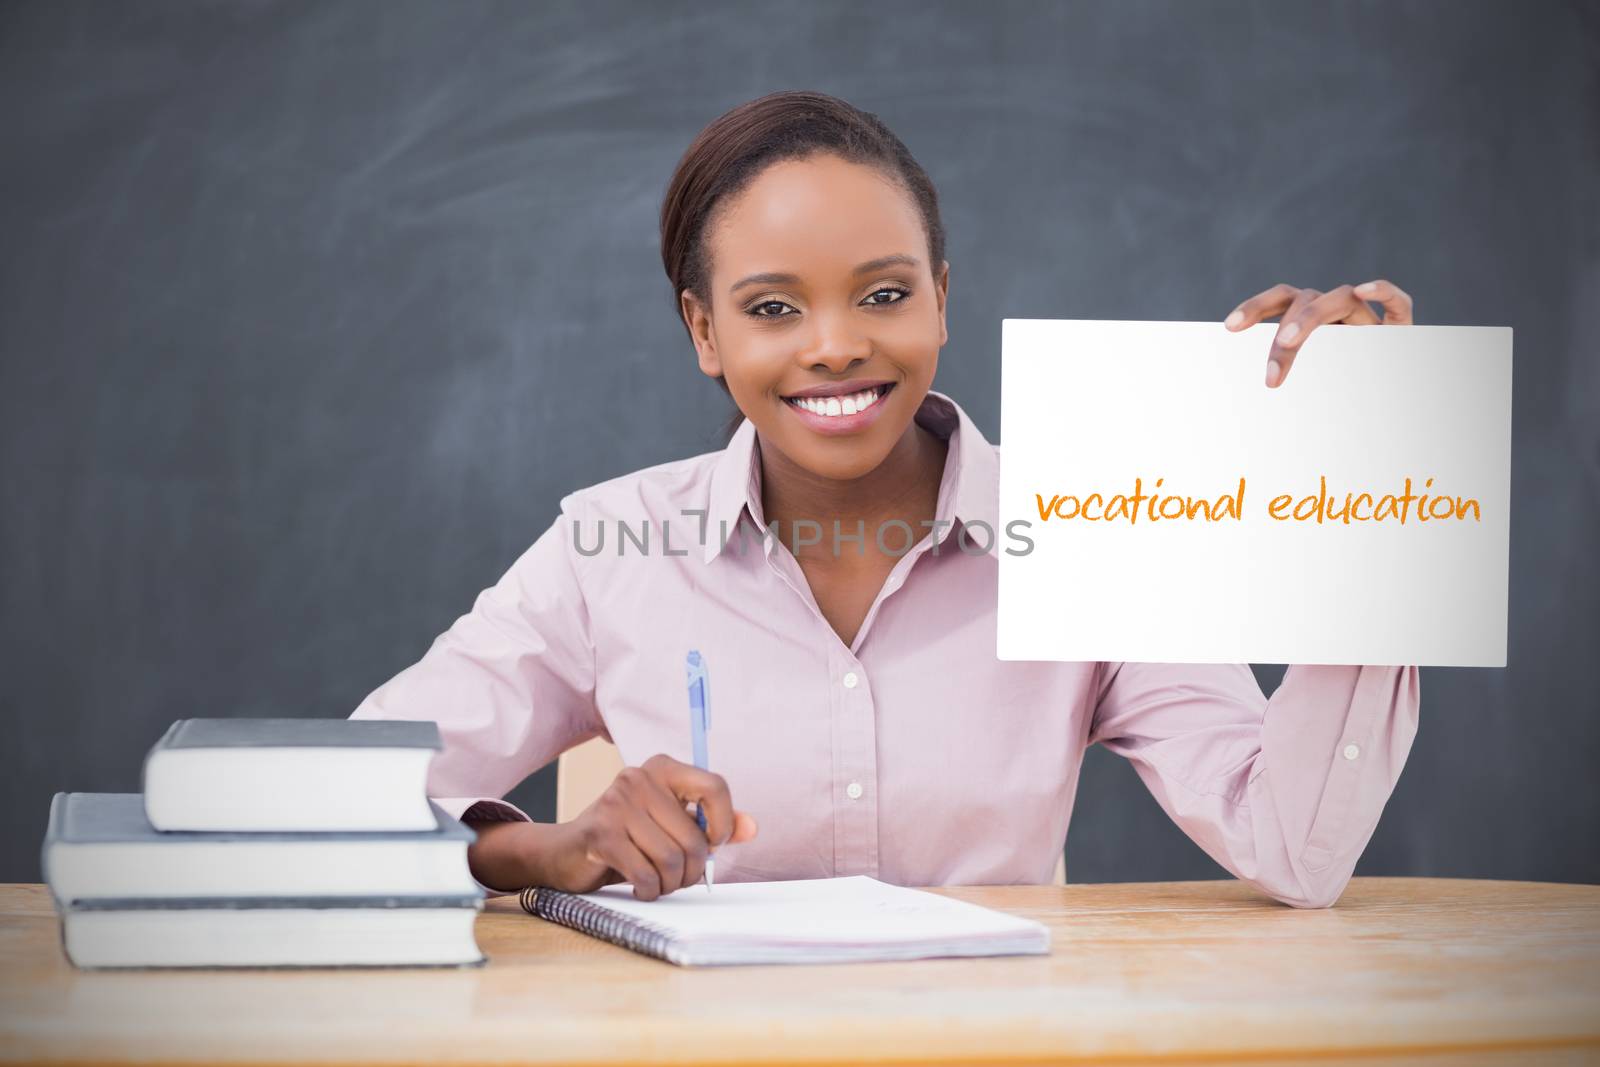 Happy teacher holding page showing vocational education in her classroom at school